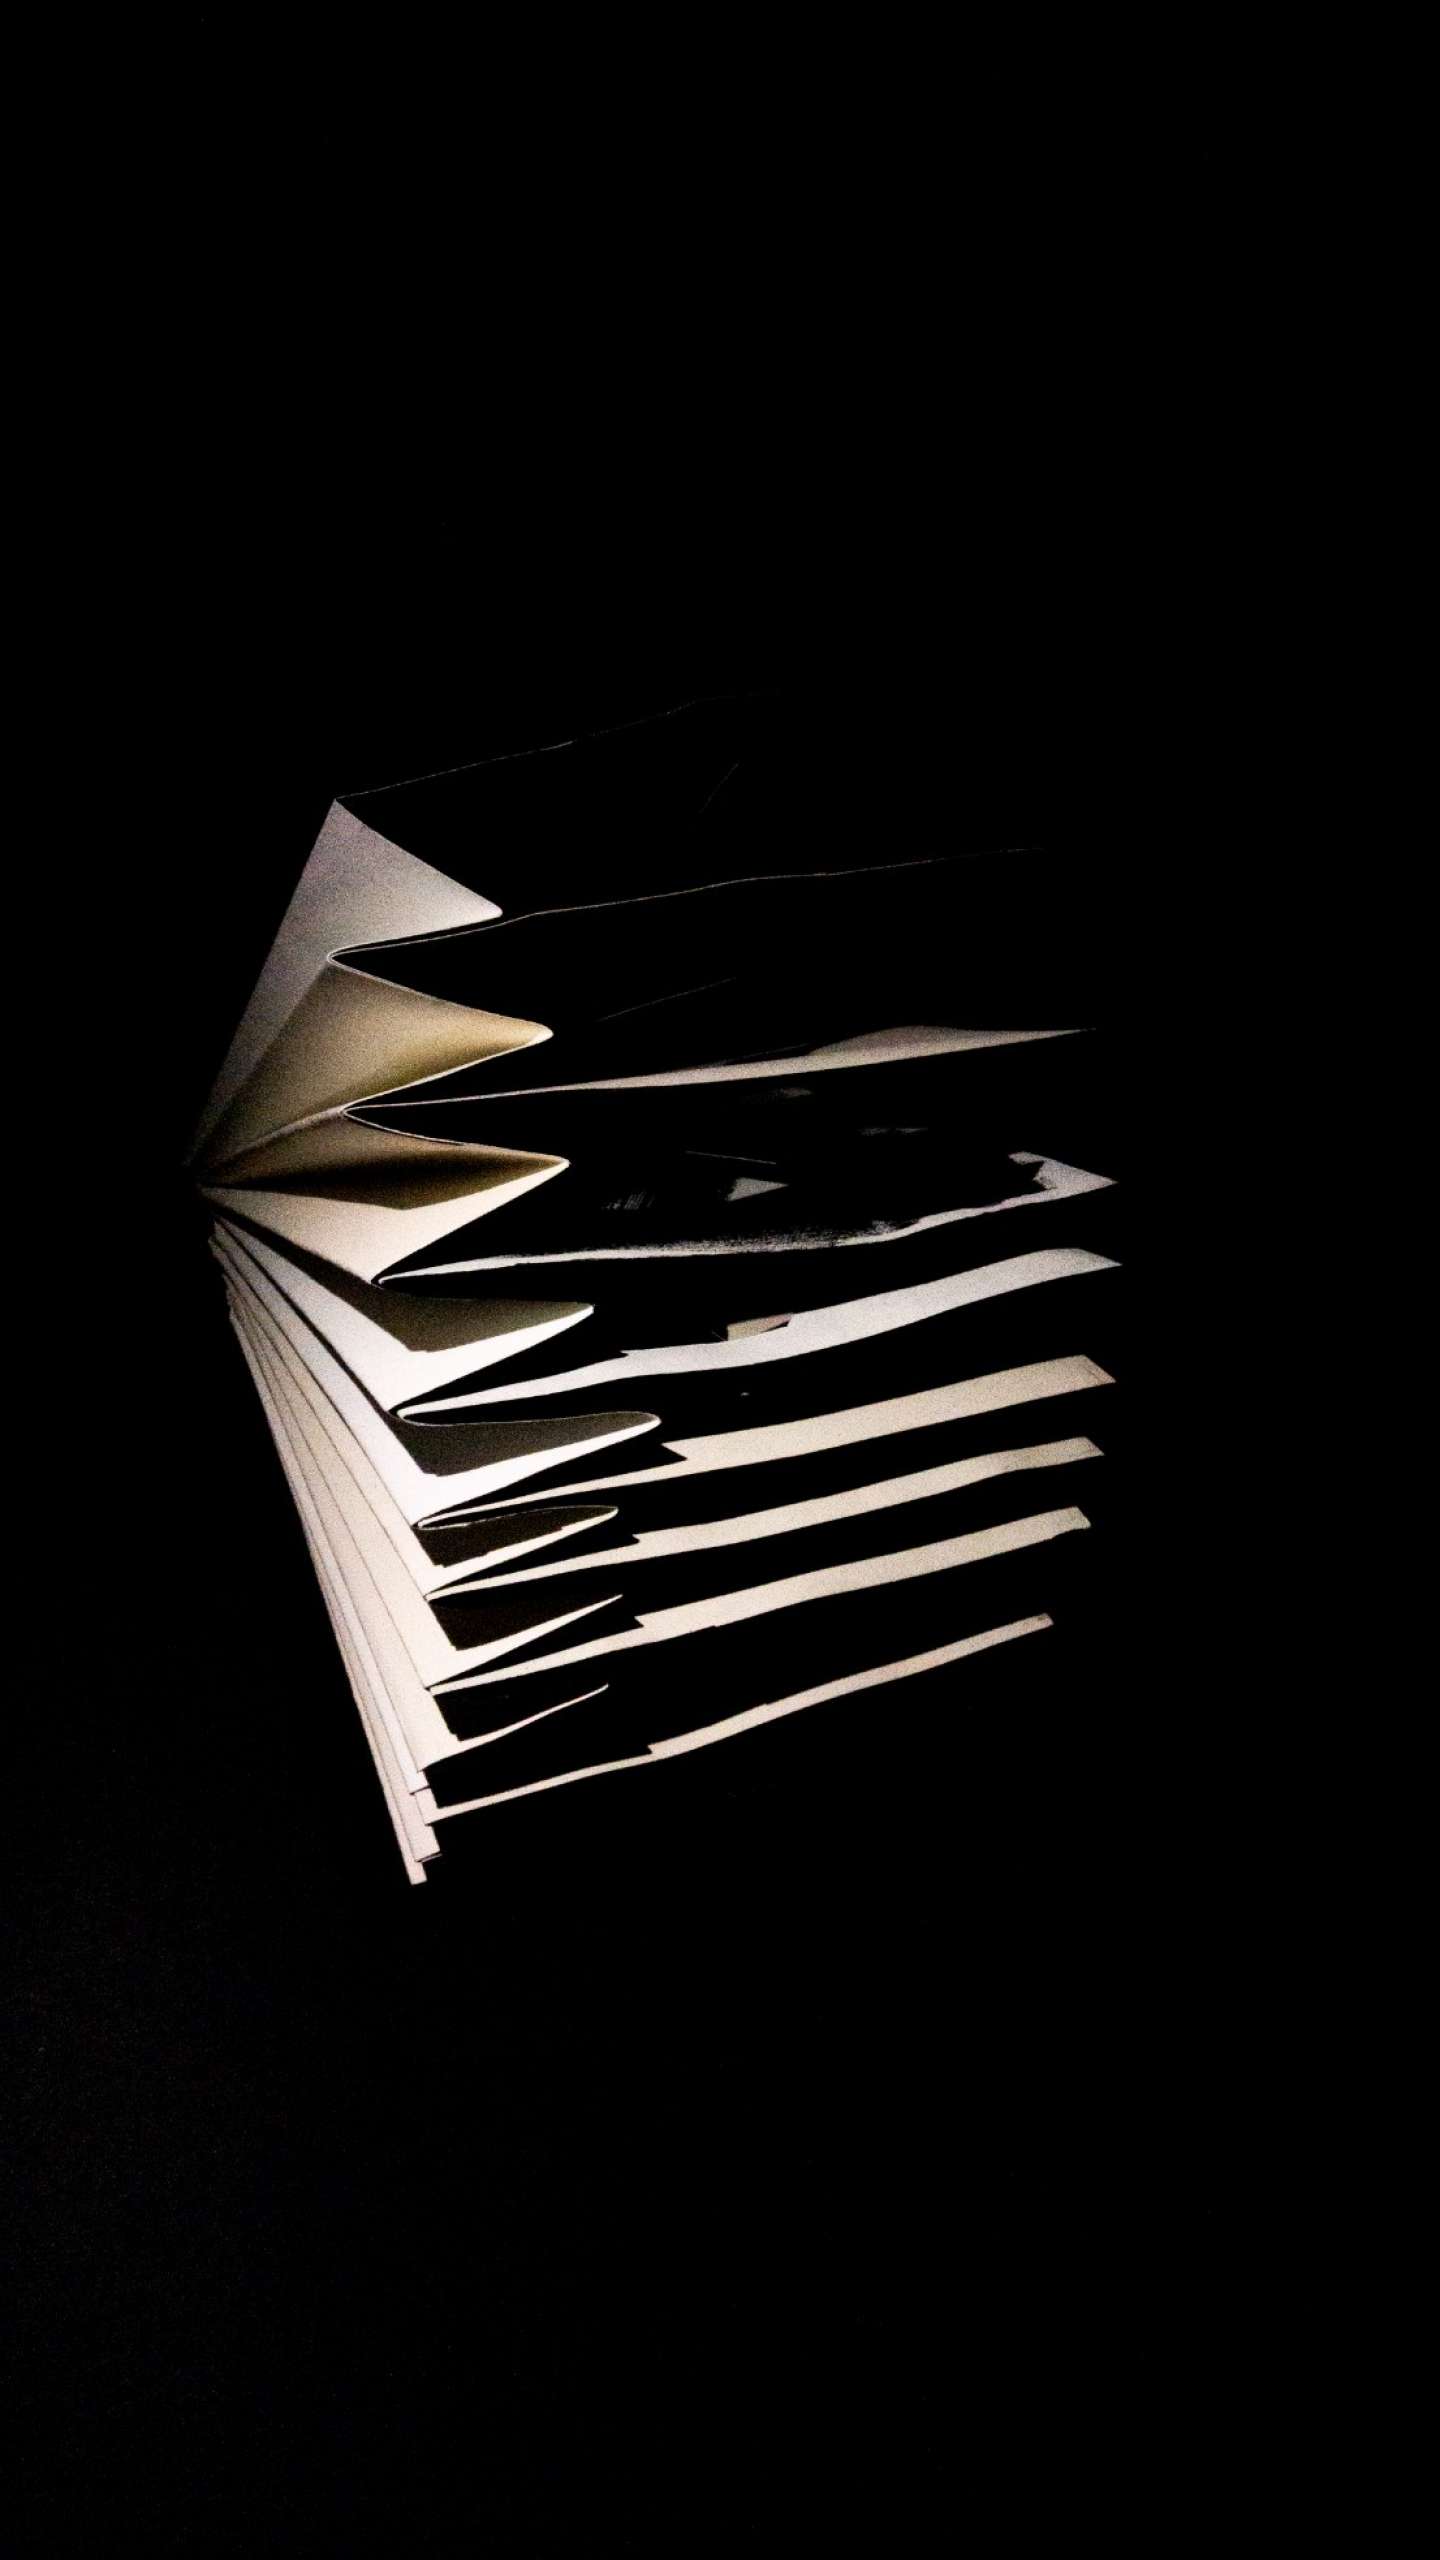 Book Art: Light and Shadow